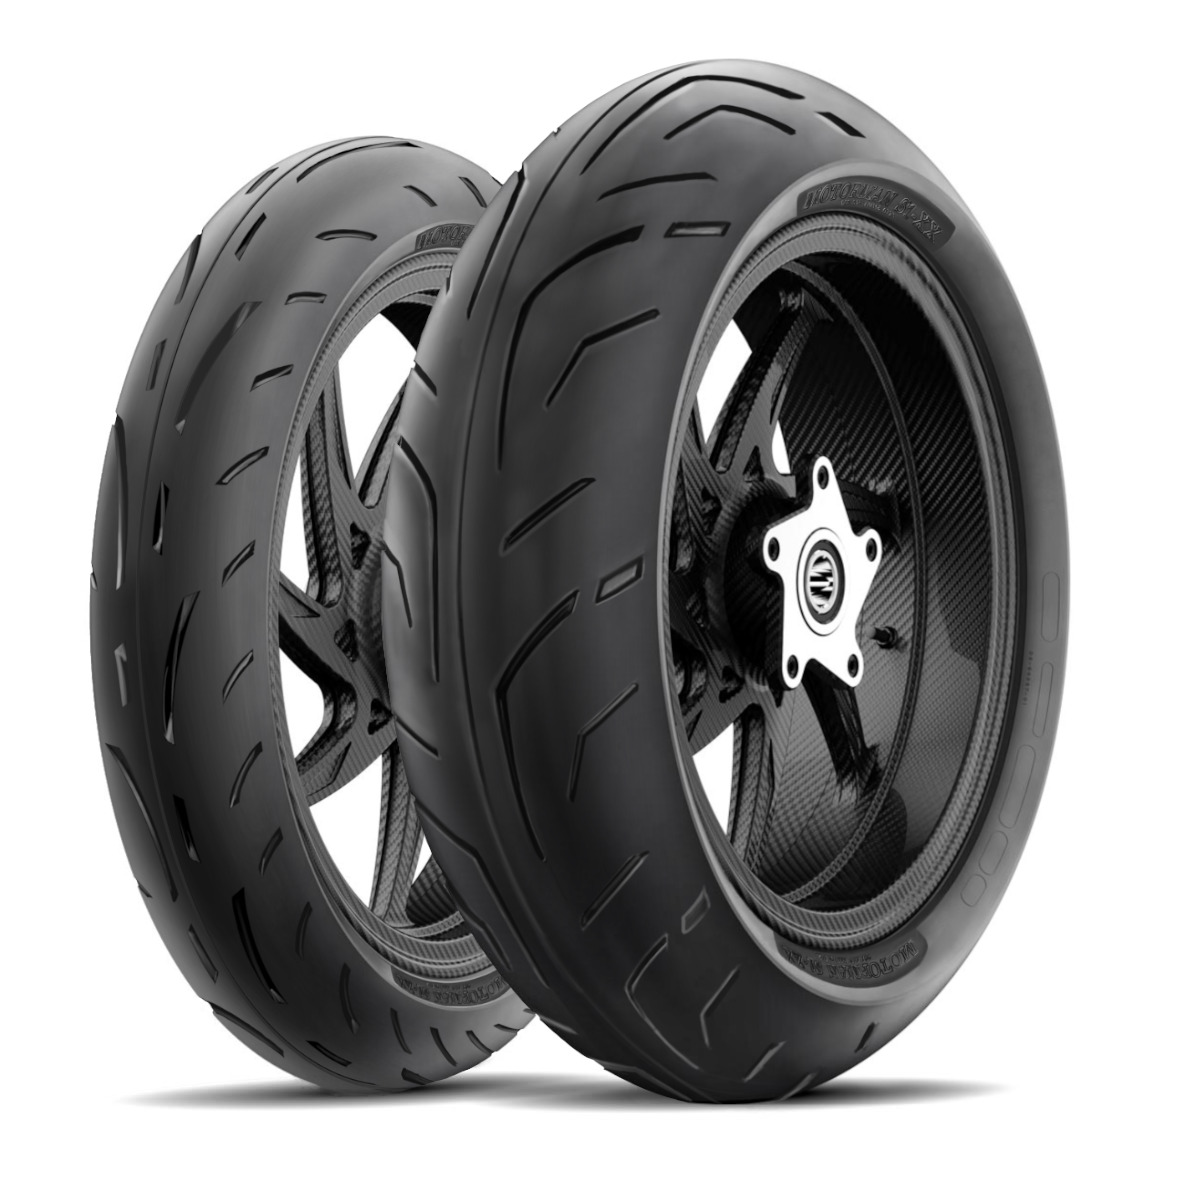 180/55-17 + 120/70-17 MMT® Motorcycle Tire SET 180/55ZR17 + 120/70-17 (2 TIRES)